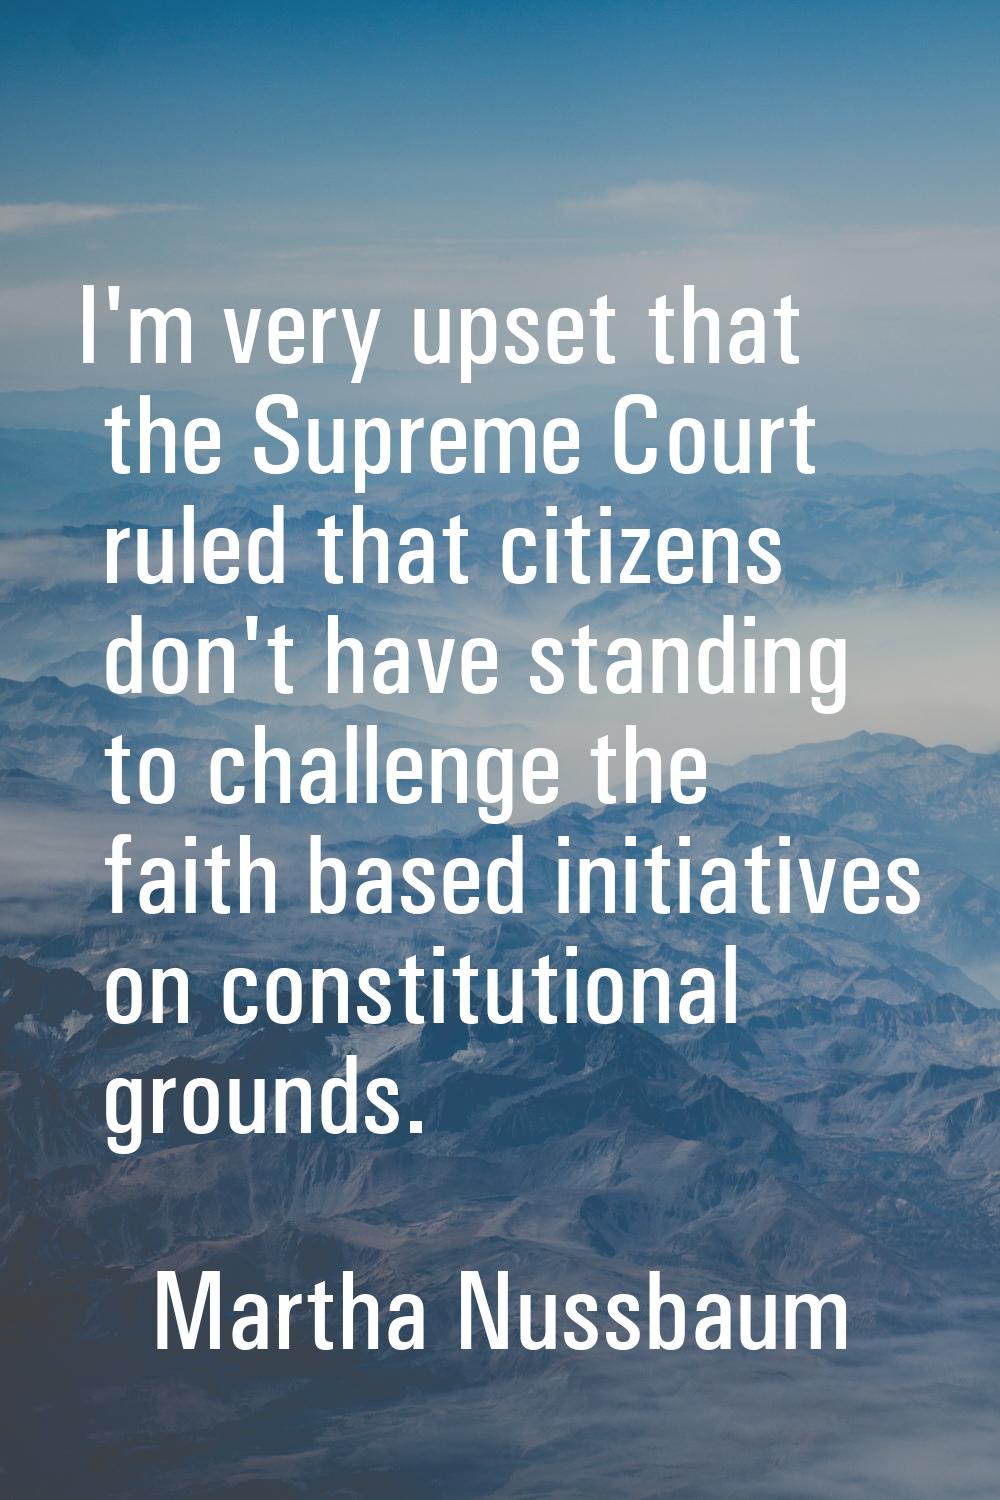 I'm very upset that the Supreme Court ruled that citizens don't have standing to challenge the fait